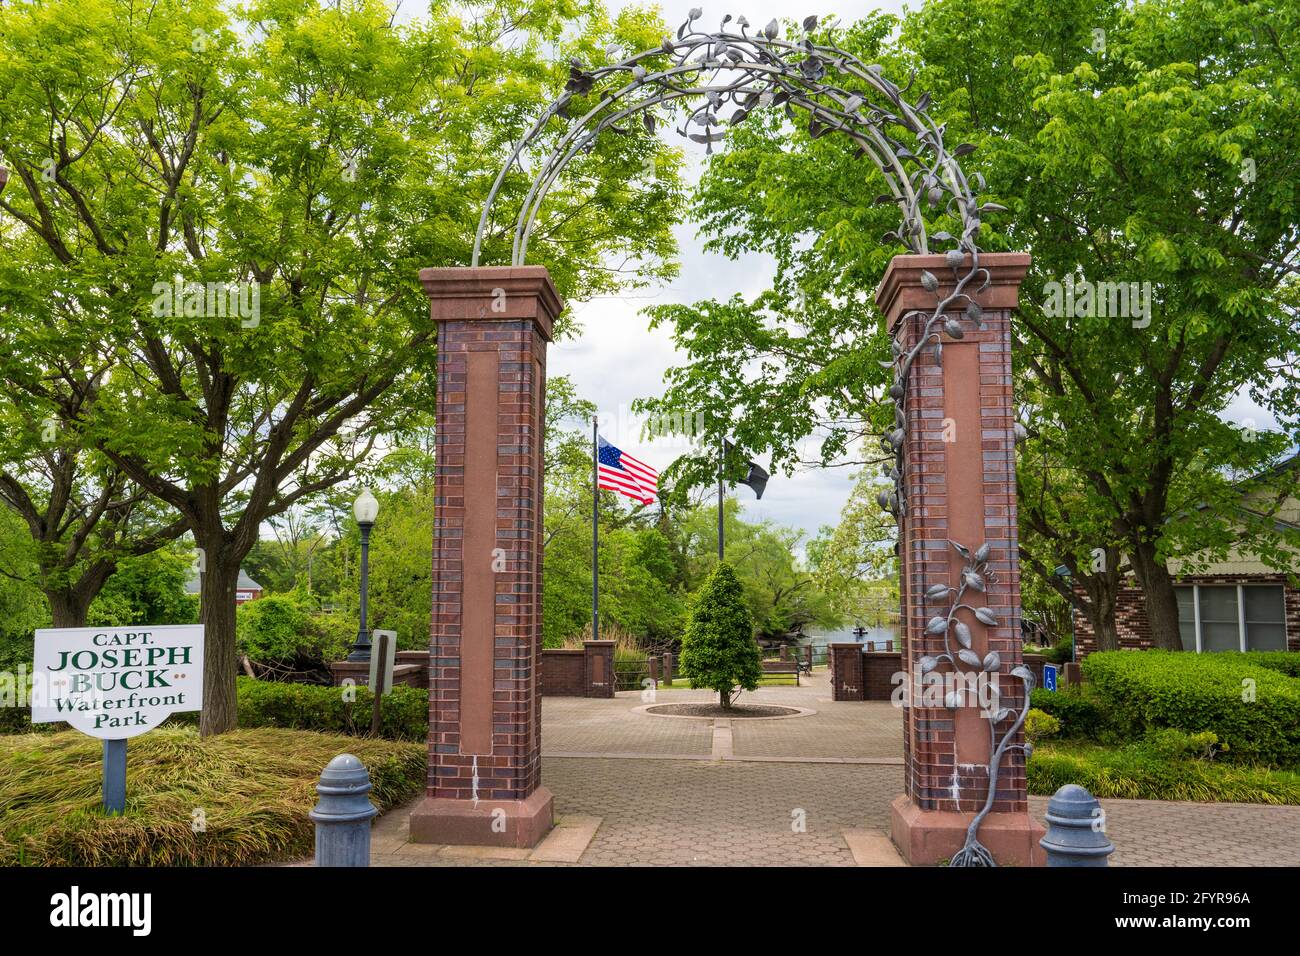 Millville, NJ - May 11, 2021: Entrance to Captain Joseph Buck Waterfront park with brick arch and metal leaf sculpture Stock Photo